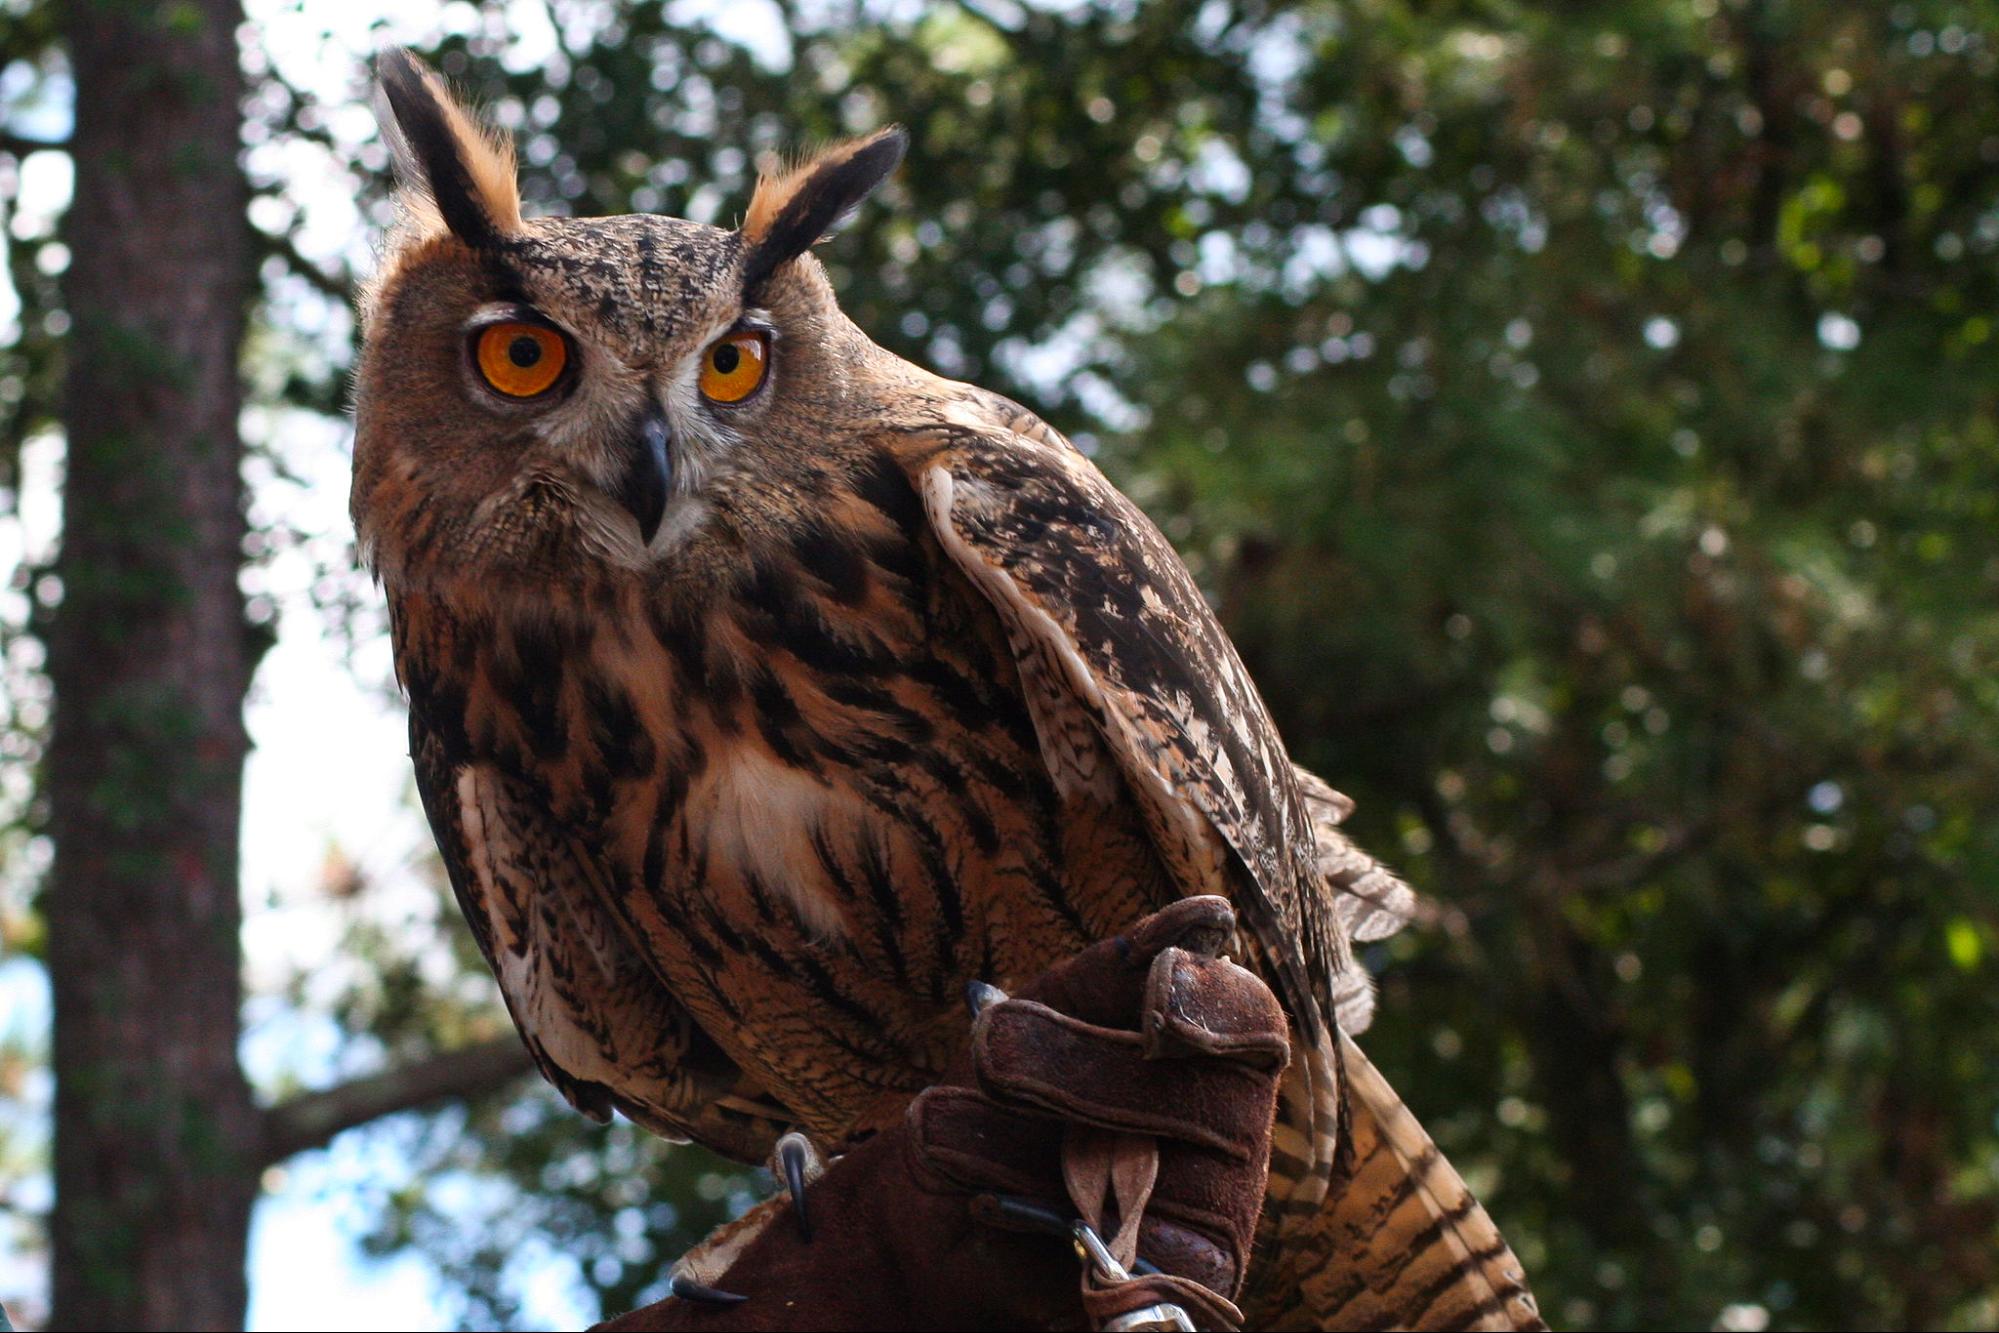 An Owl Named Flaco Is Loose in Central Park, With Vandals to Blame